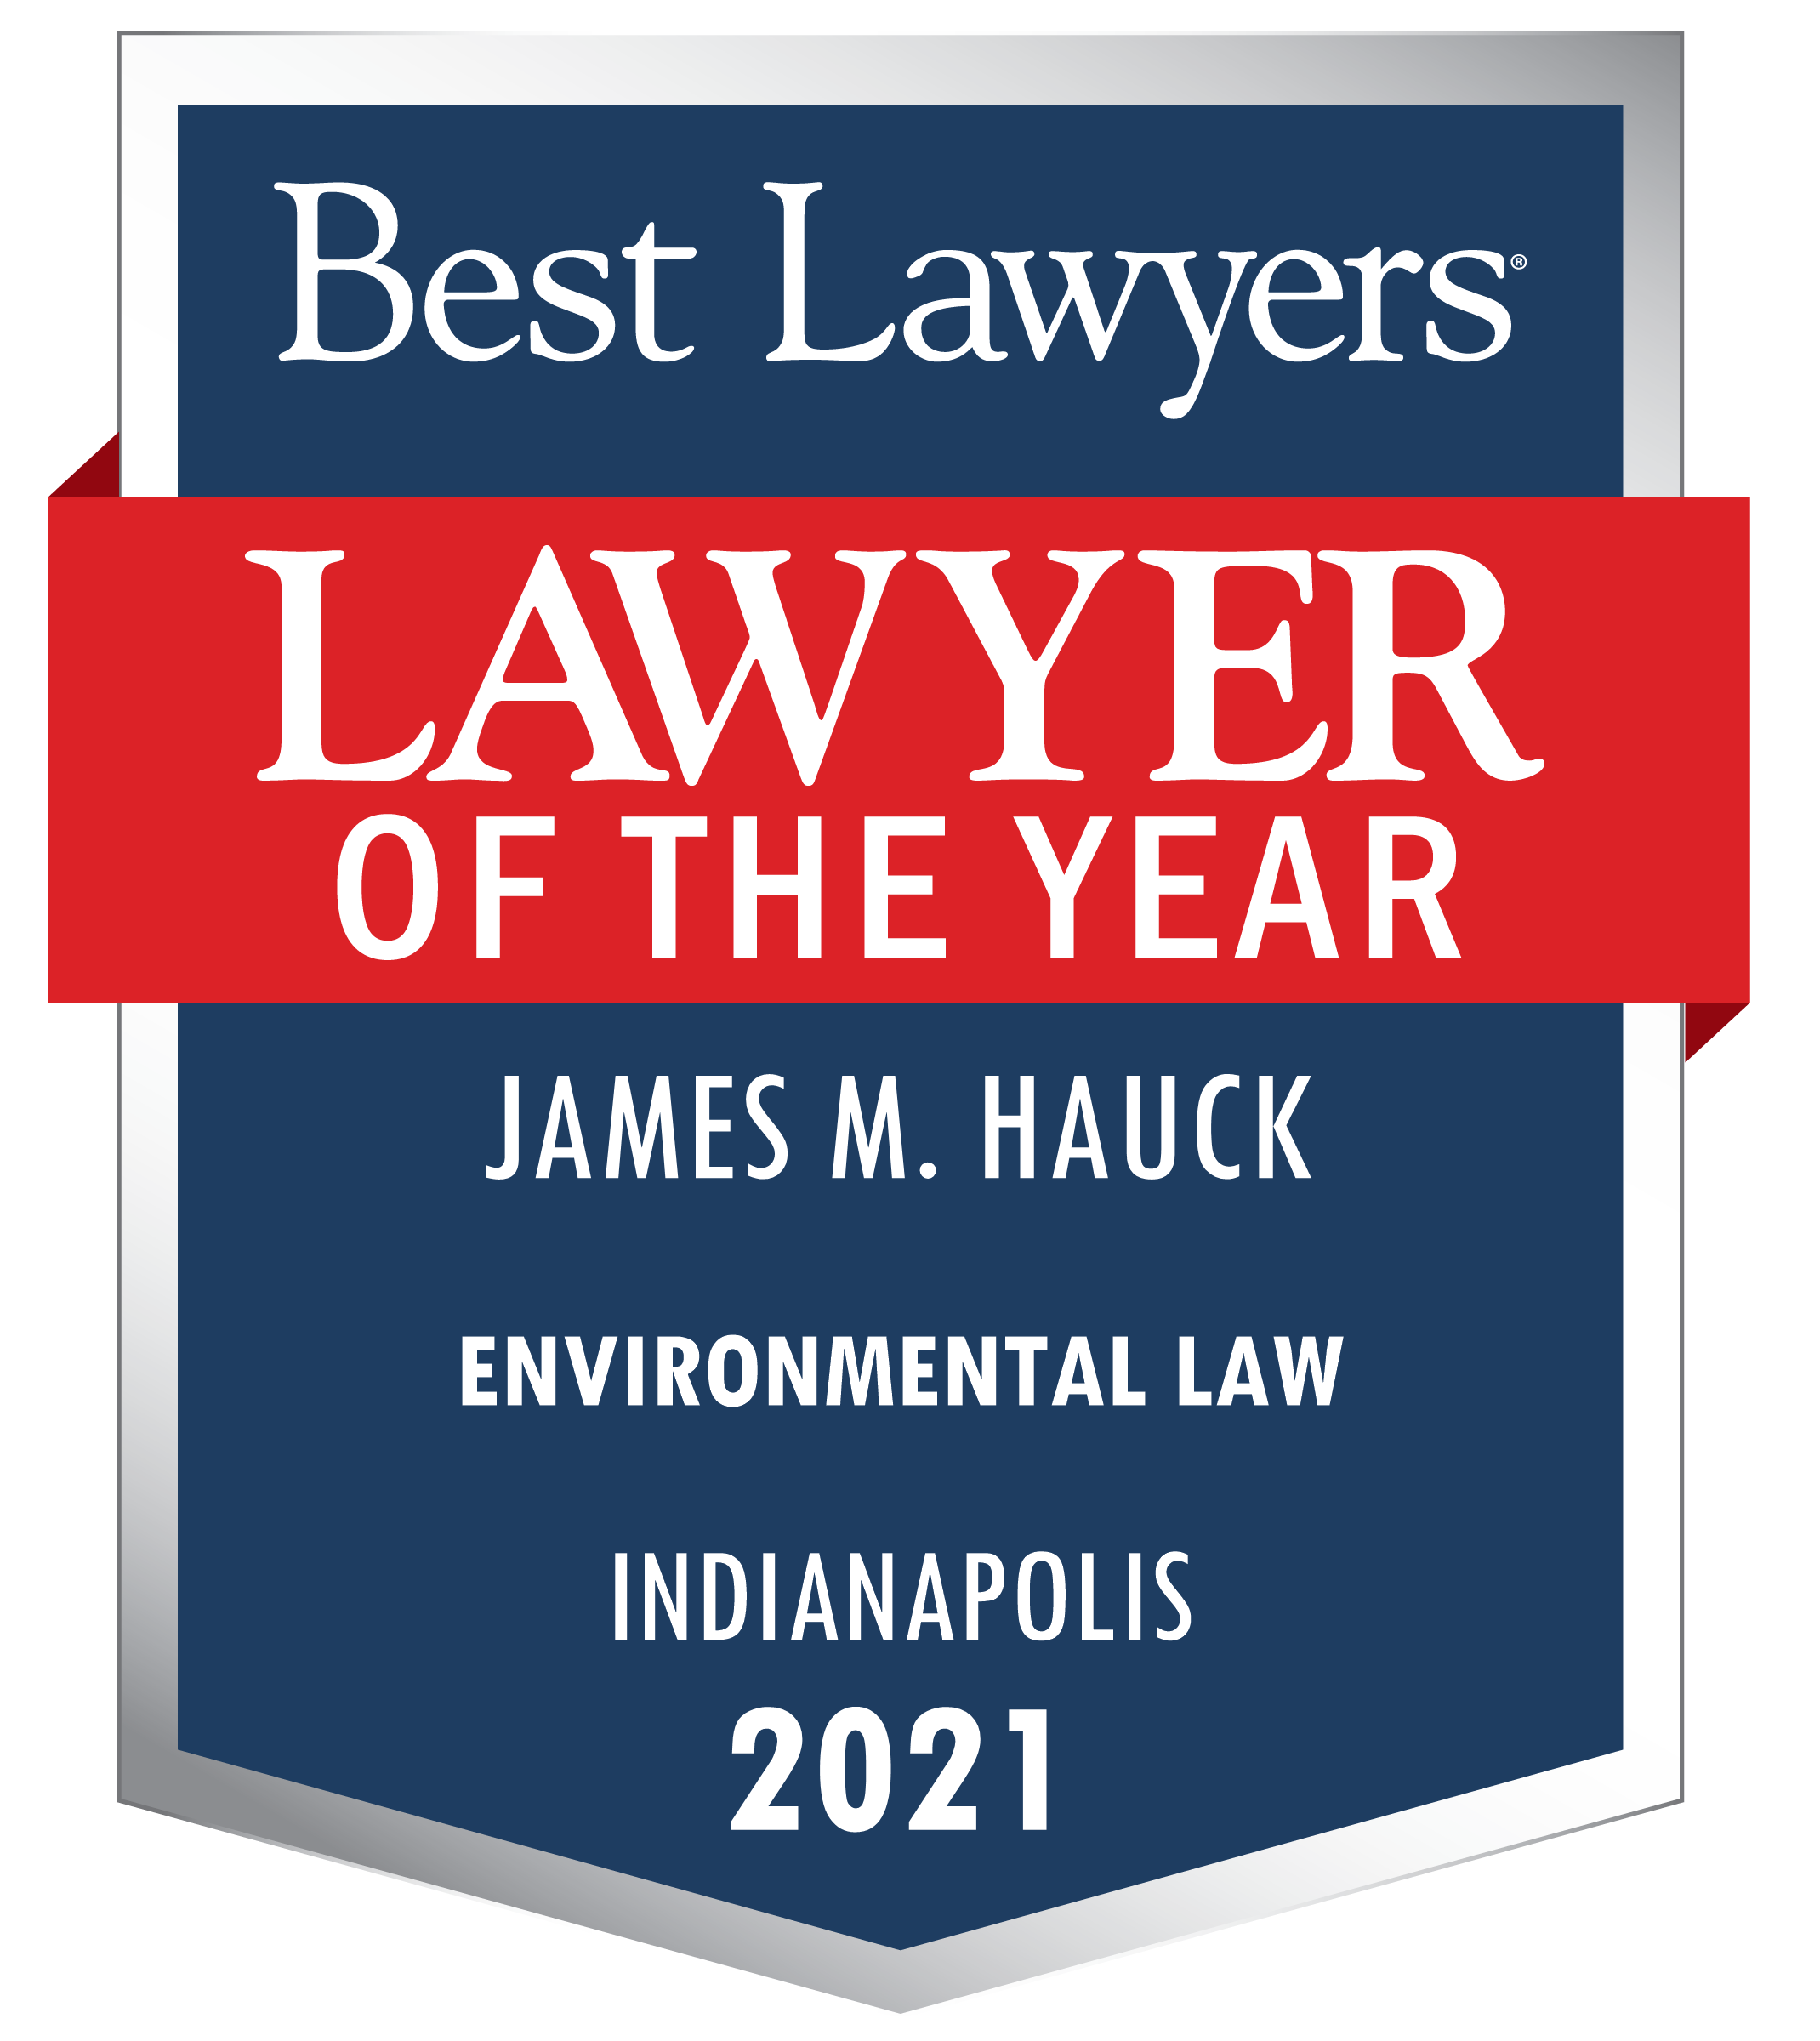 JMH - Best Lawyers - _Lawyer of the Year_ Contemporary Logo 2021.png